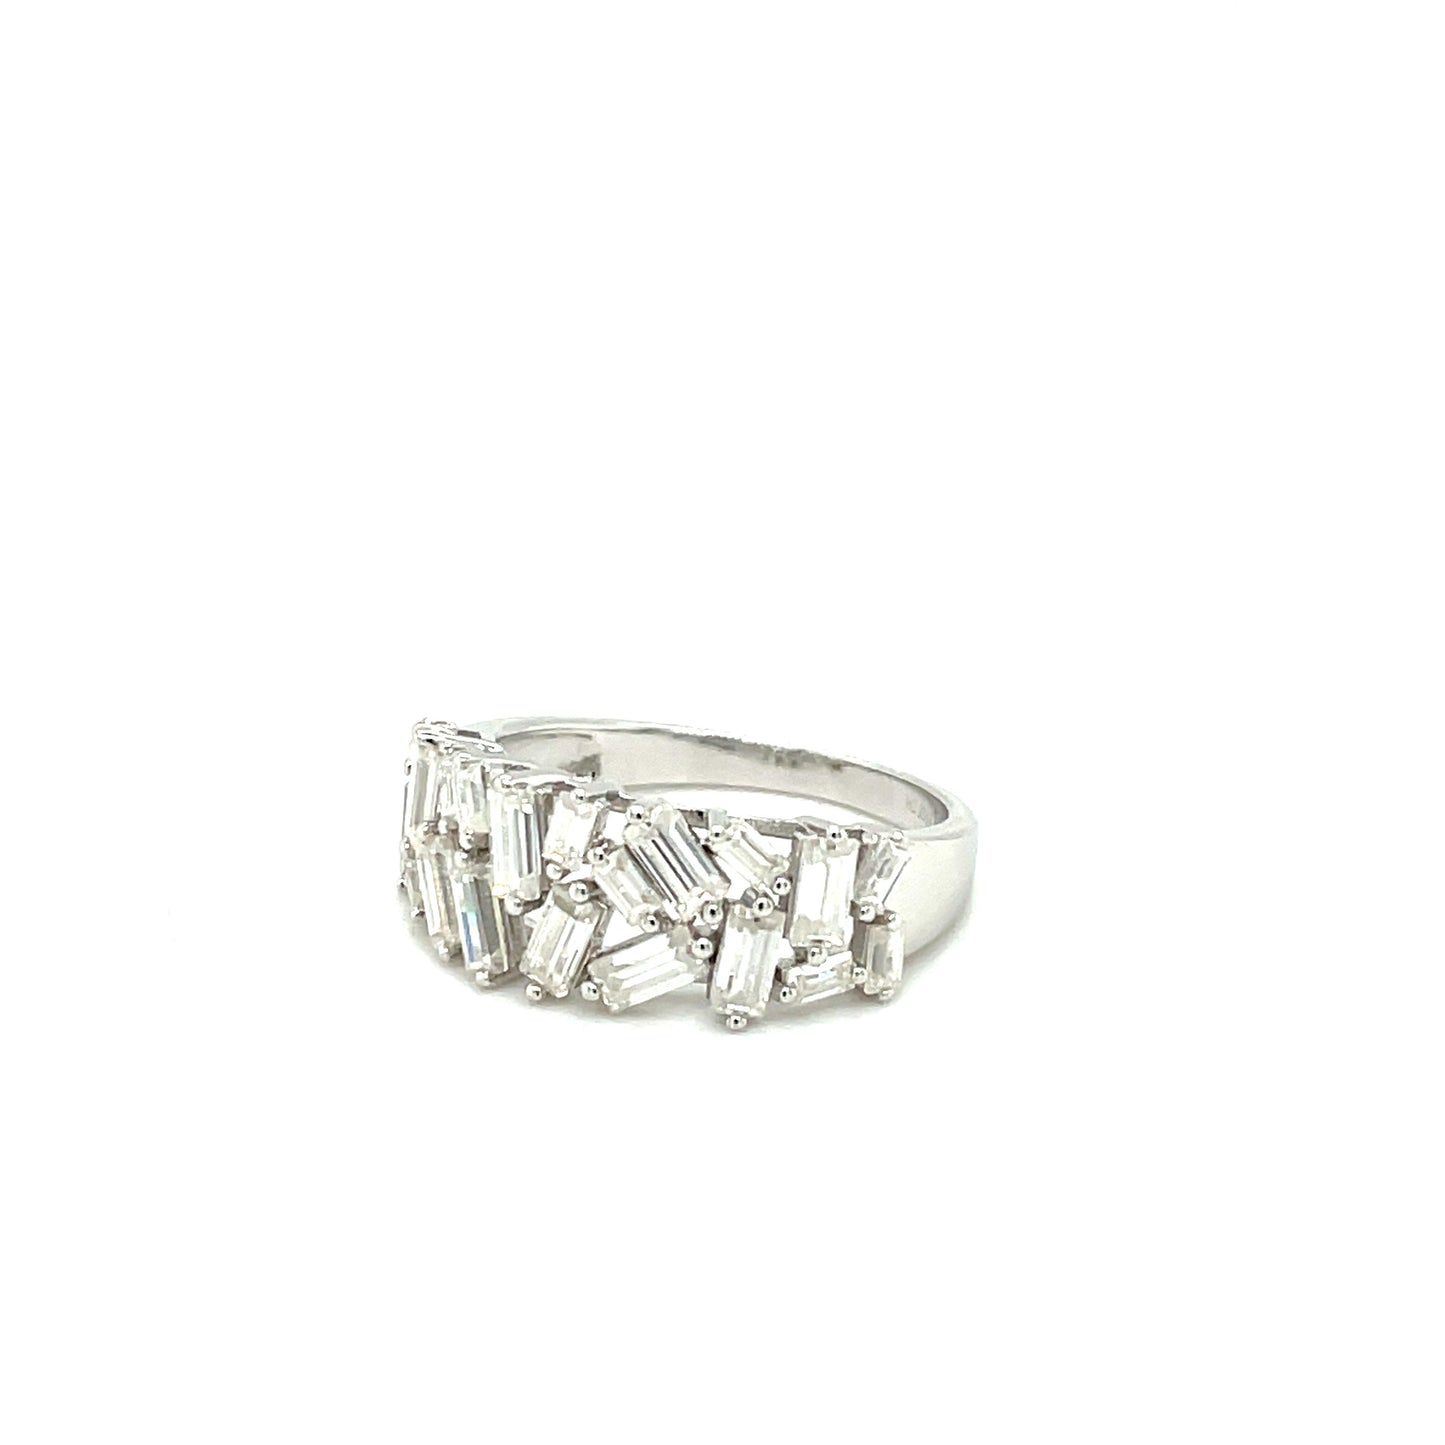 Through Thick & Thin Platinum Plated, Sterling Silver Ring w/Rectangular Moissanite Gemstone Baquettes